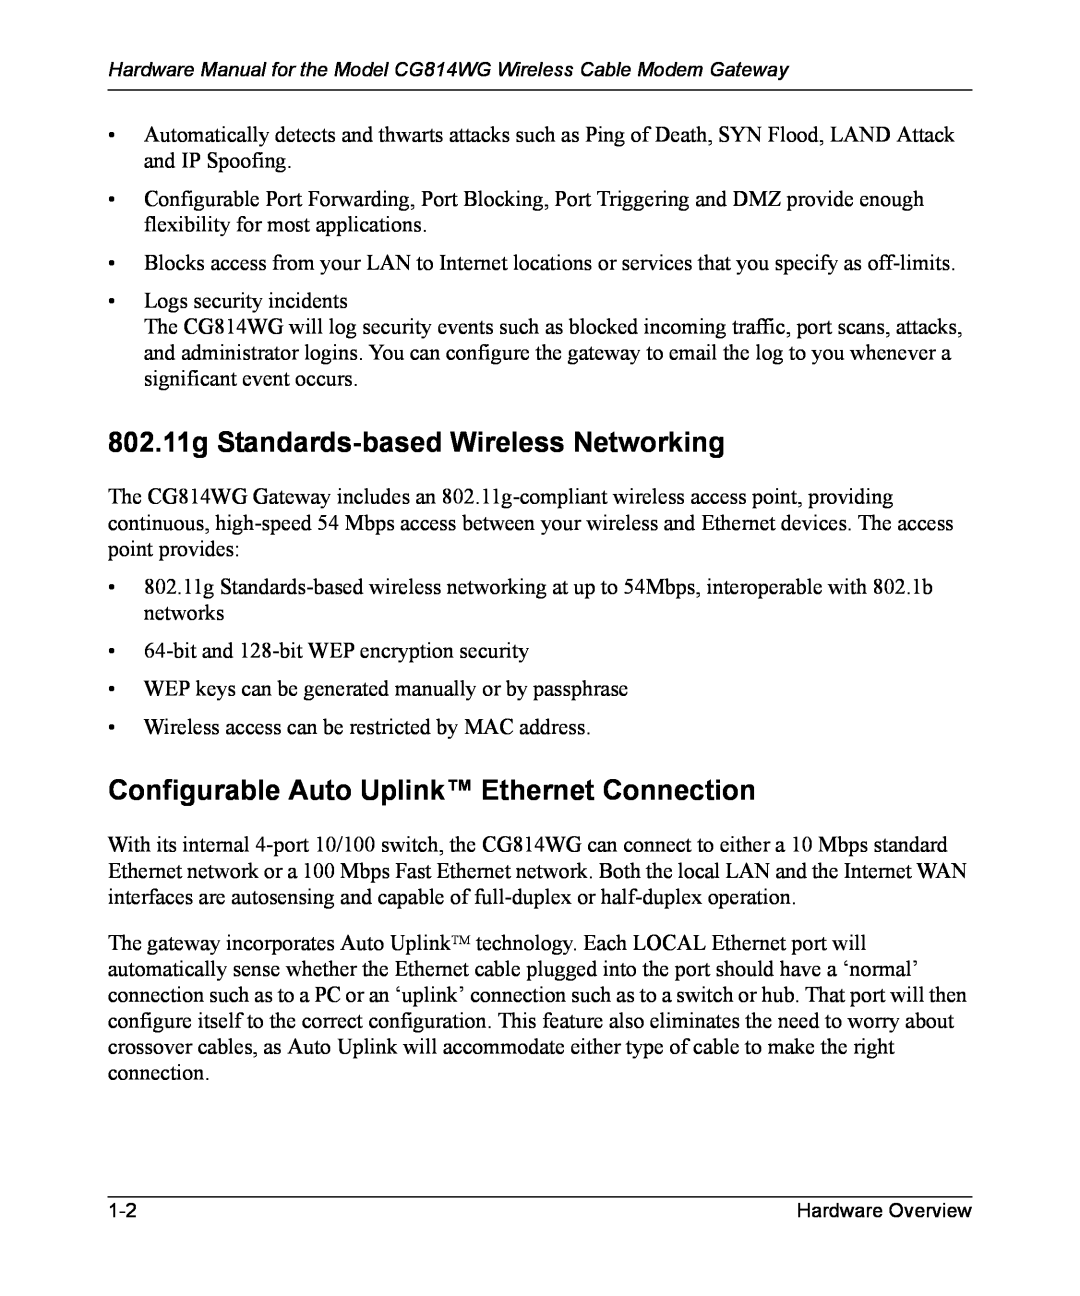 NETGEAR CG814WG manual 802.11g Standards-based Wireless Networking, Configurable Auto Uplink Ethernet Connection 